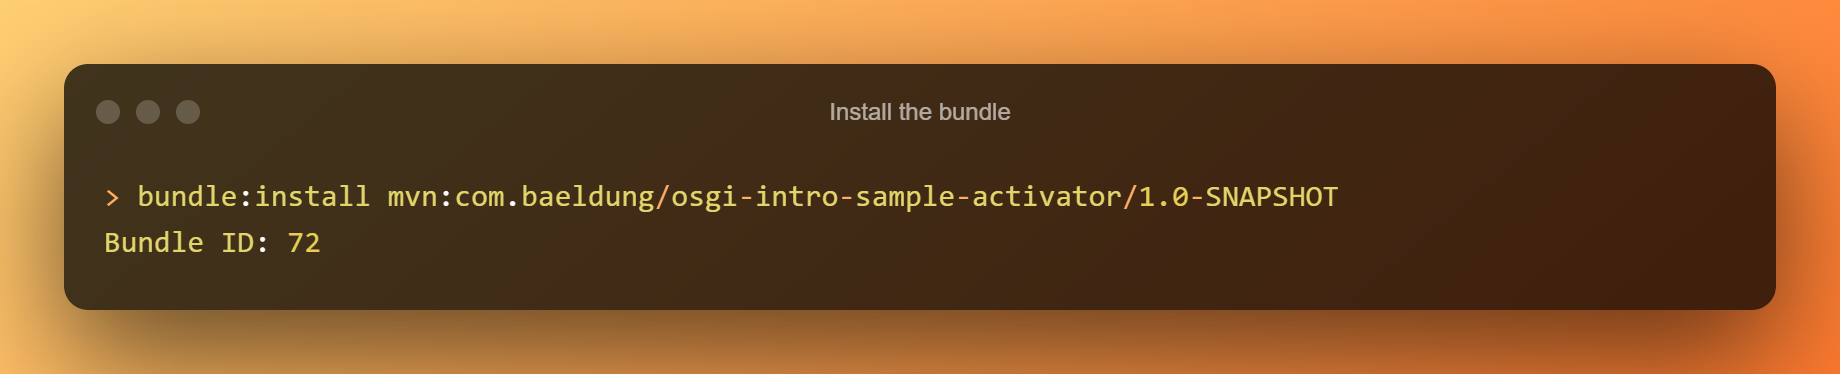 Install The Bundle